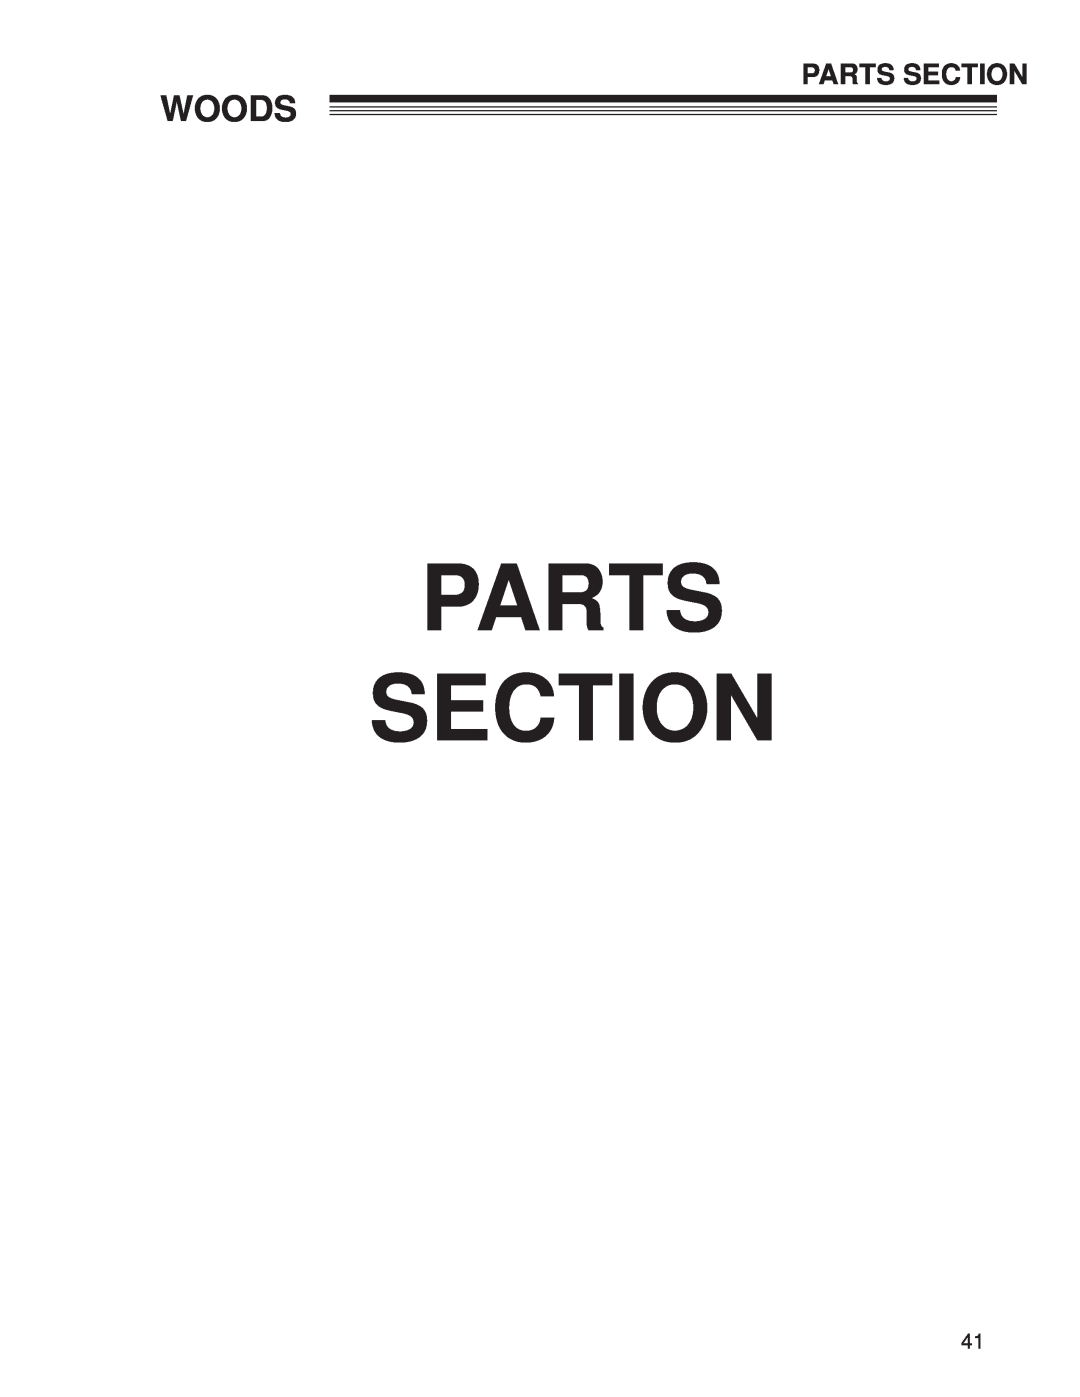 Woods Equipment CZR2242B, CZR2652B manual Parts Section, Woods 